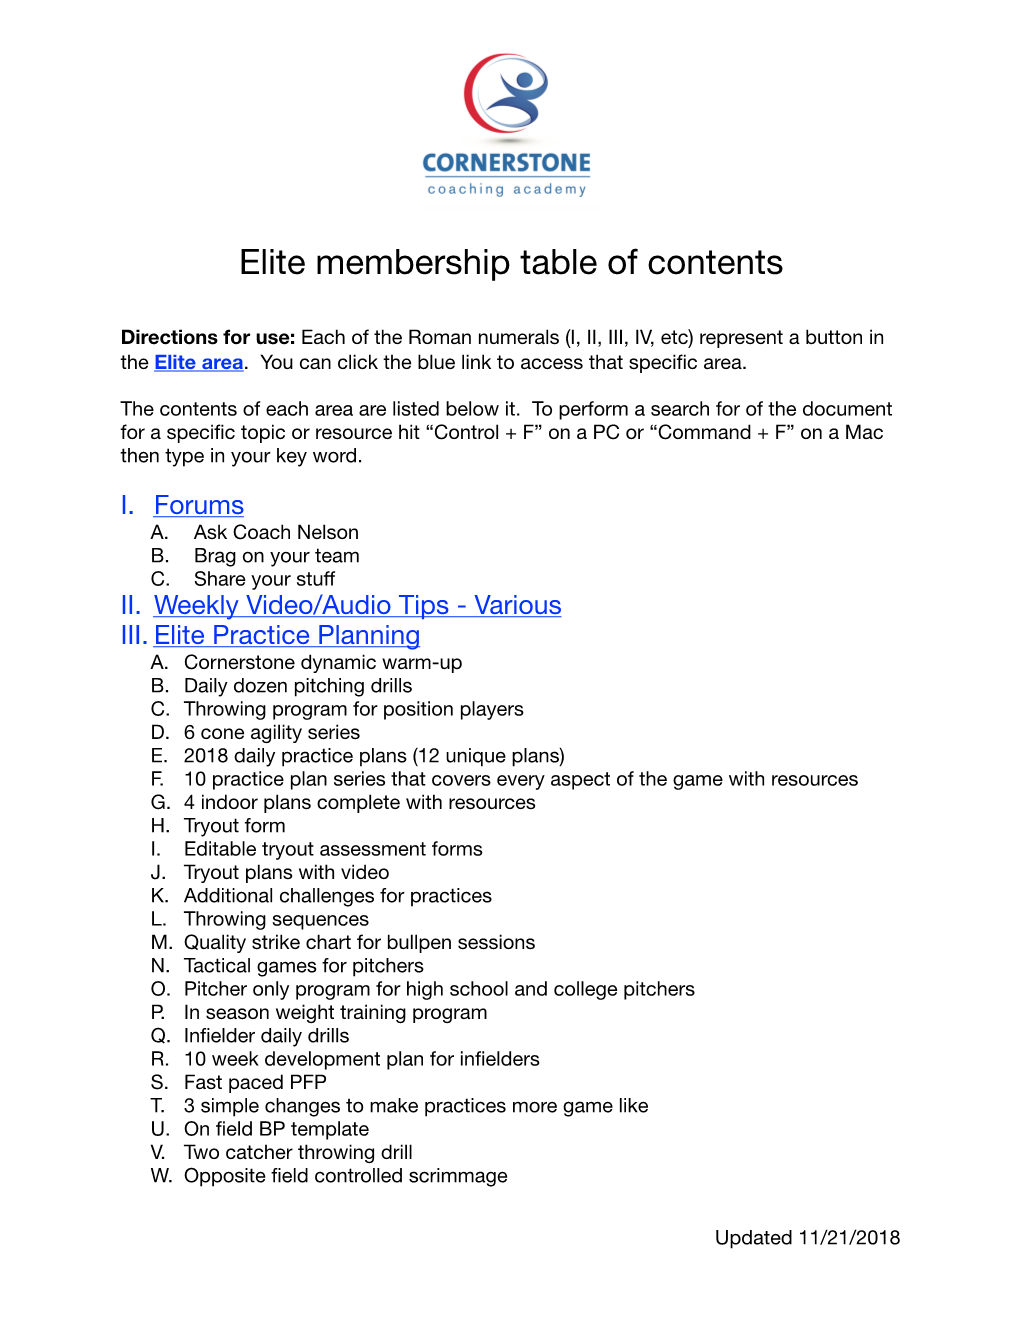 Elite Members Table of Contents (Black Friday)